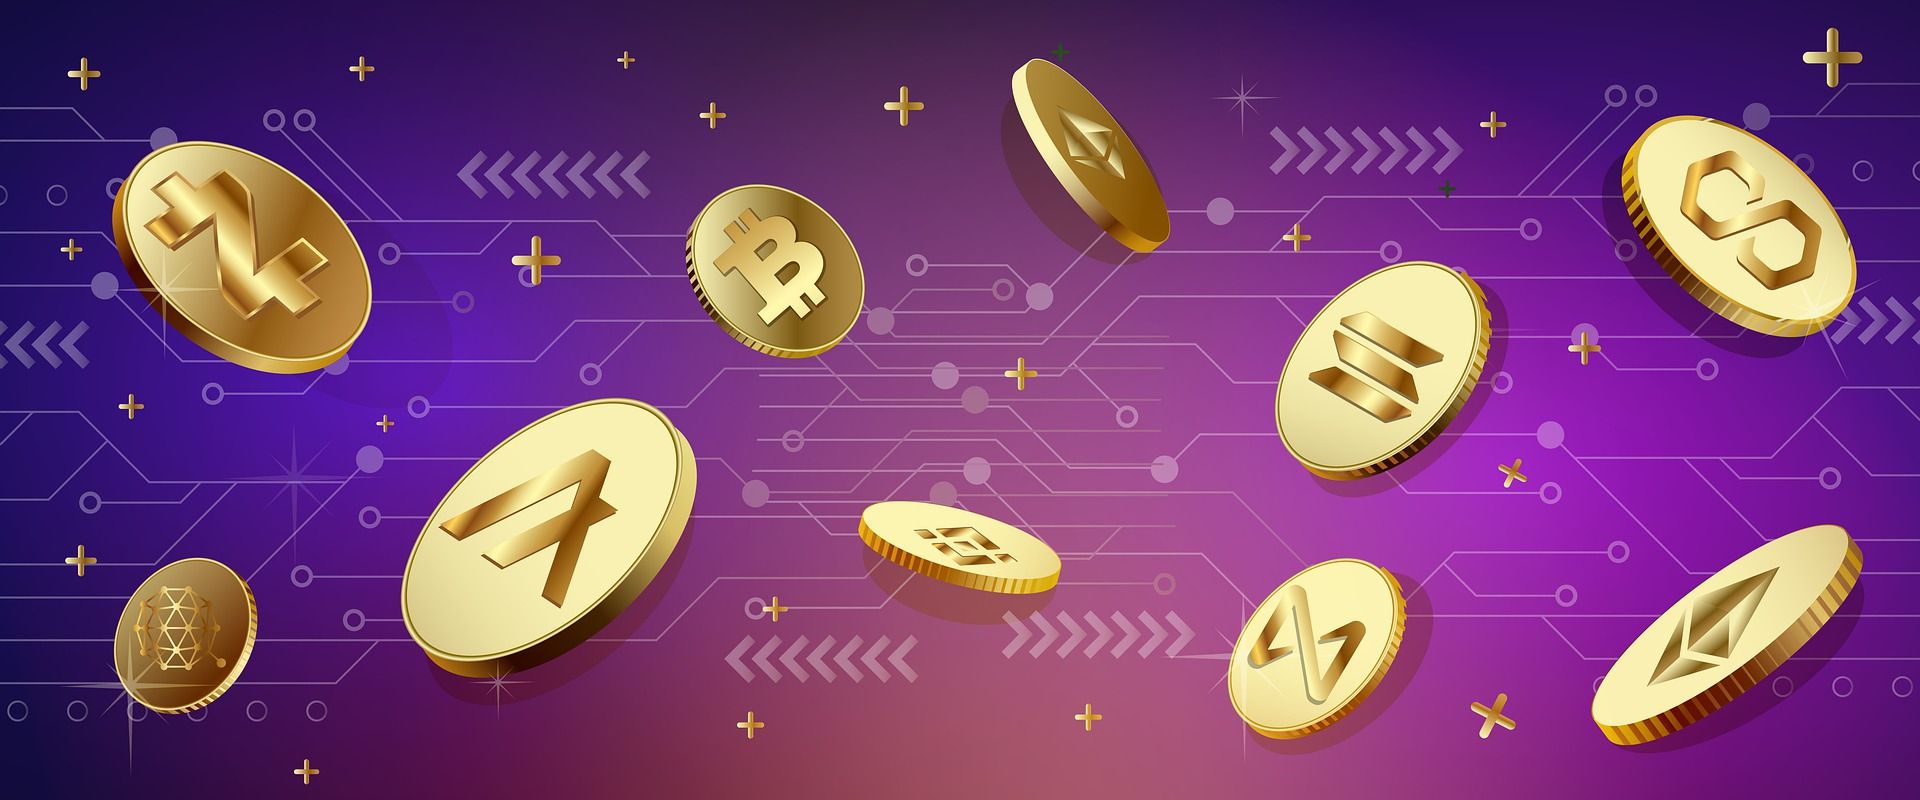 Crypto Gaming Explained: How To Buy Gaming Crypto Coins